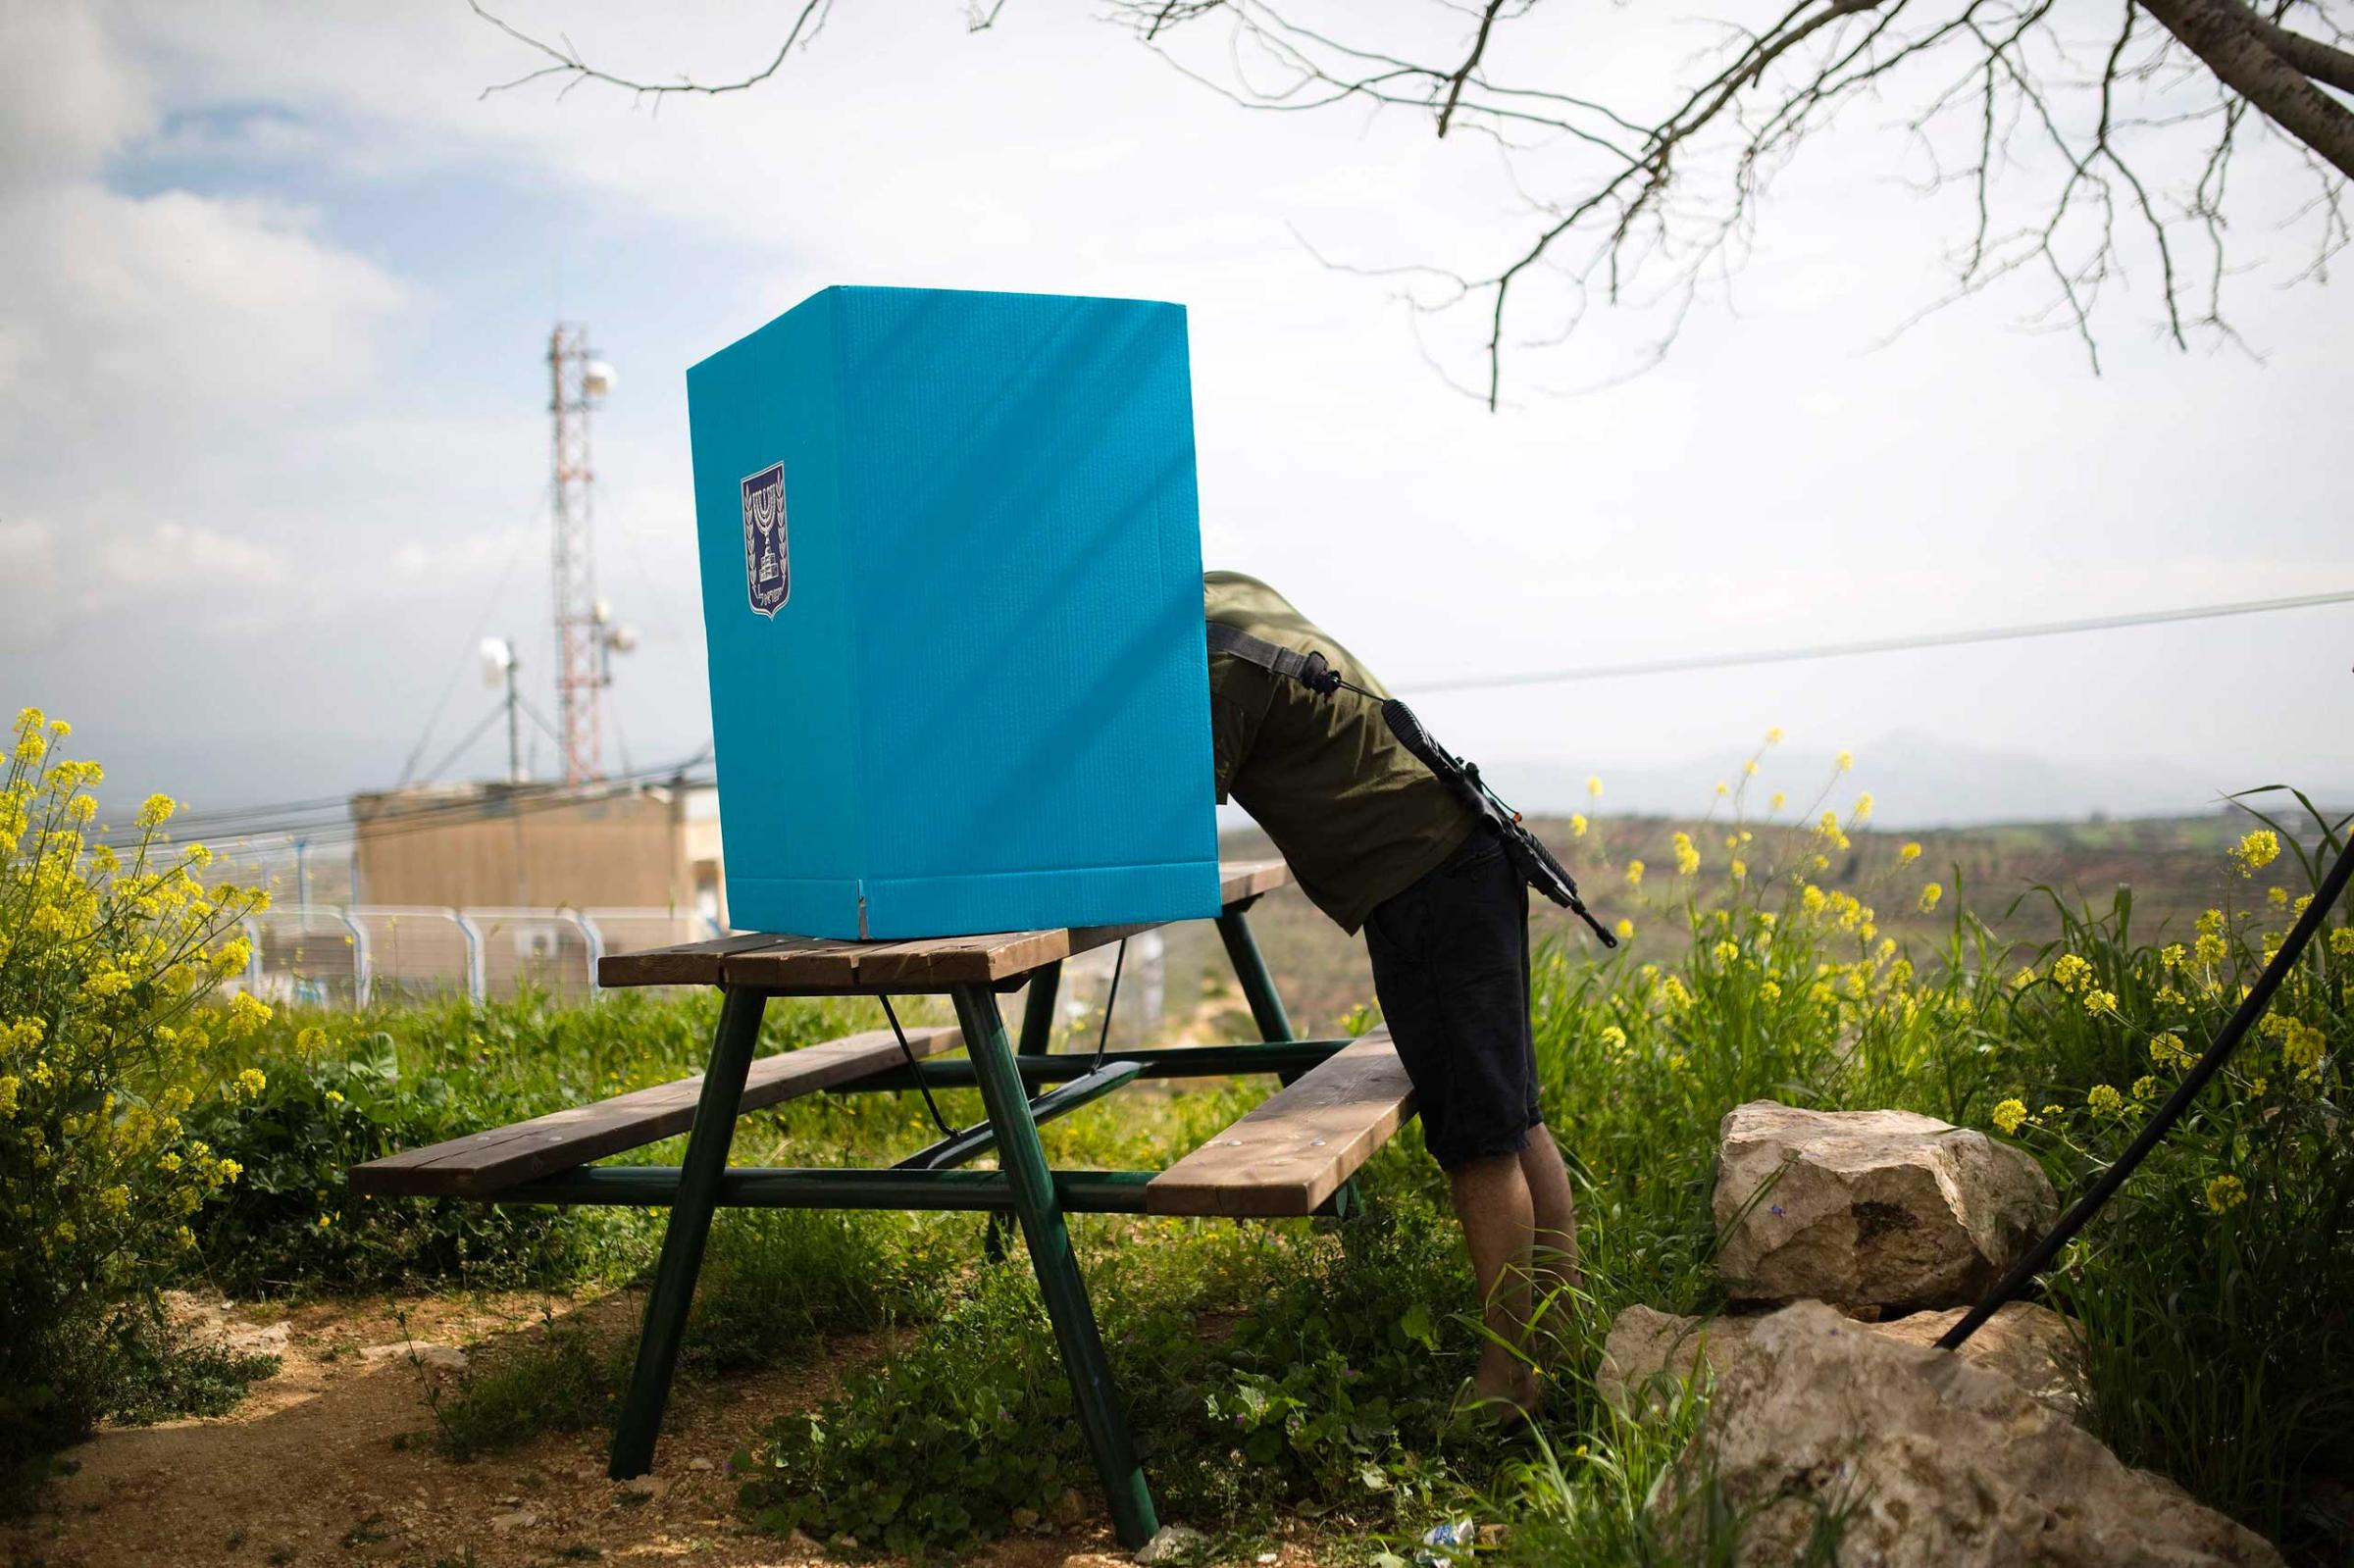 An Israeli soldier casts his ballot for the parliamentary election behind a mobile voting booth in the West Bank Jewish settlement of Migdalim, near Ariel, March 17, 2015.